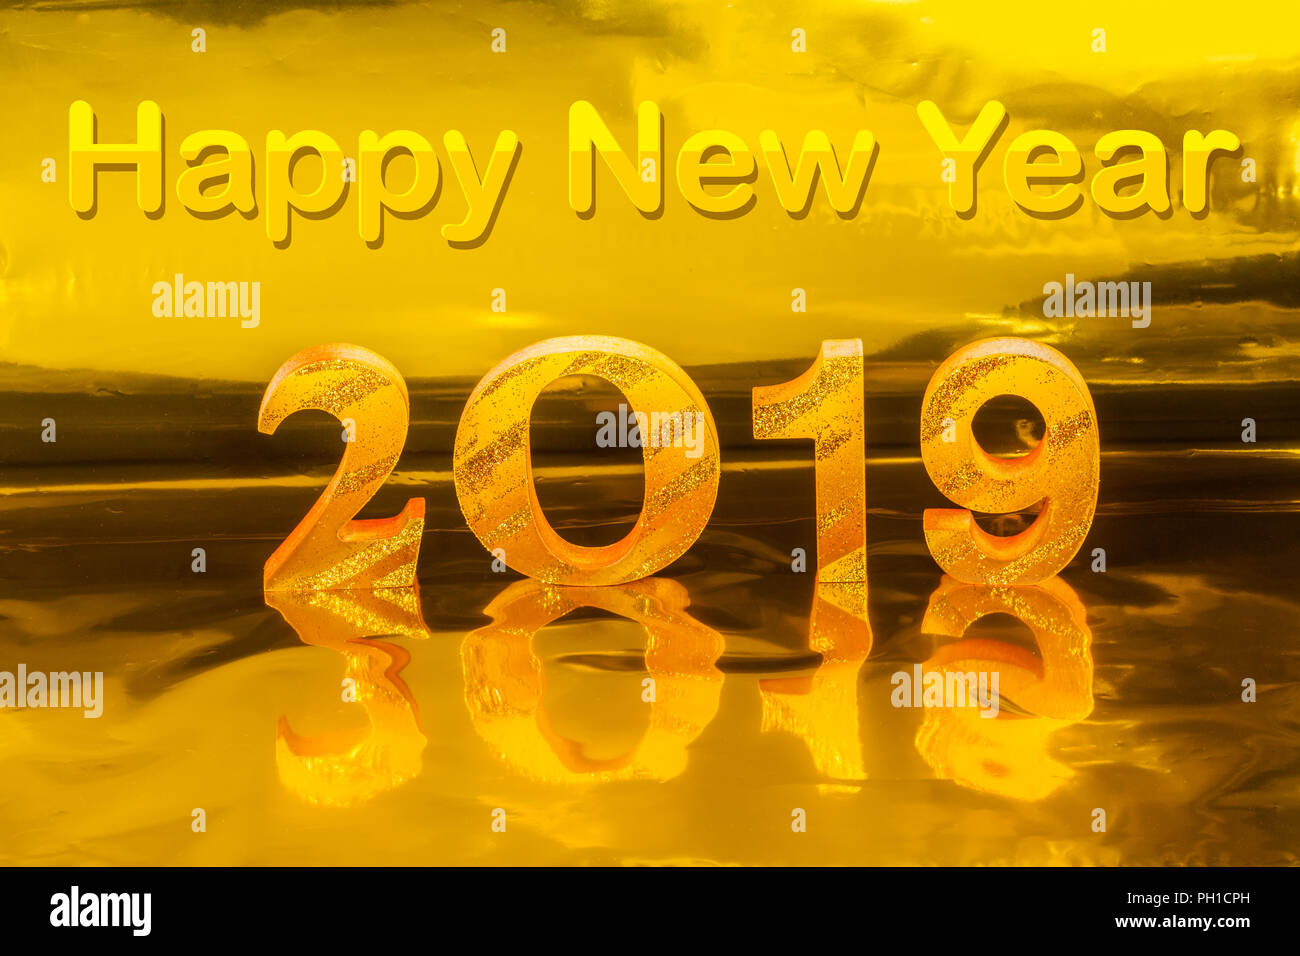 happy new year 2019 with gold writing in golden background is mean the golden year for lucky all year Stock Photo